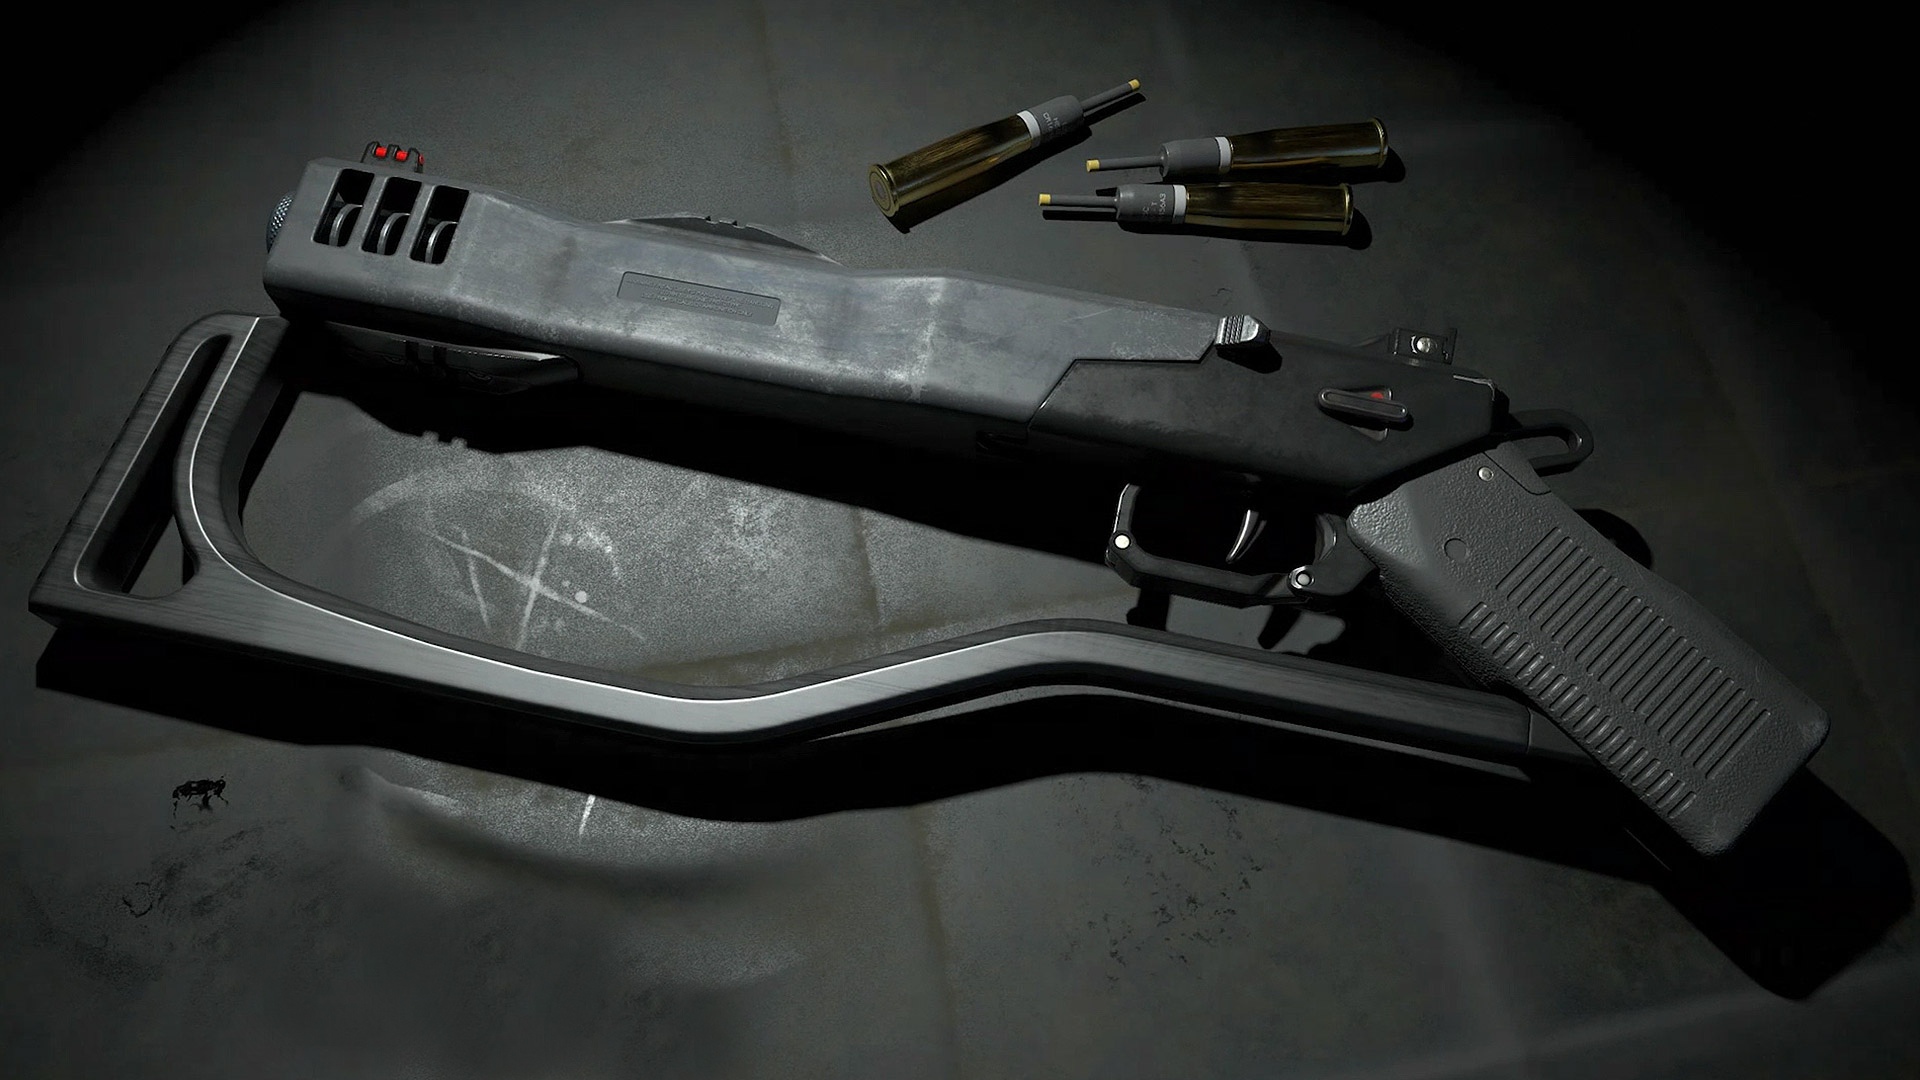 Rainbow Six Siege Operation Crimson Heist: The GONNE-6 secondary weapon in Siege, lying on a black metal surface.